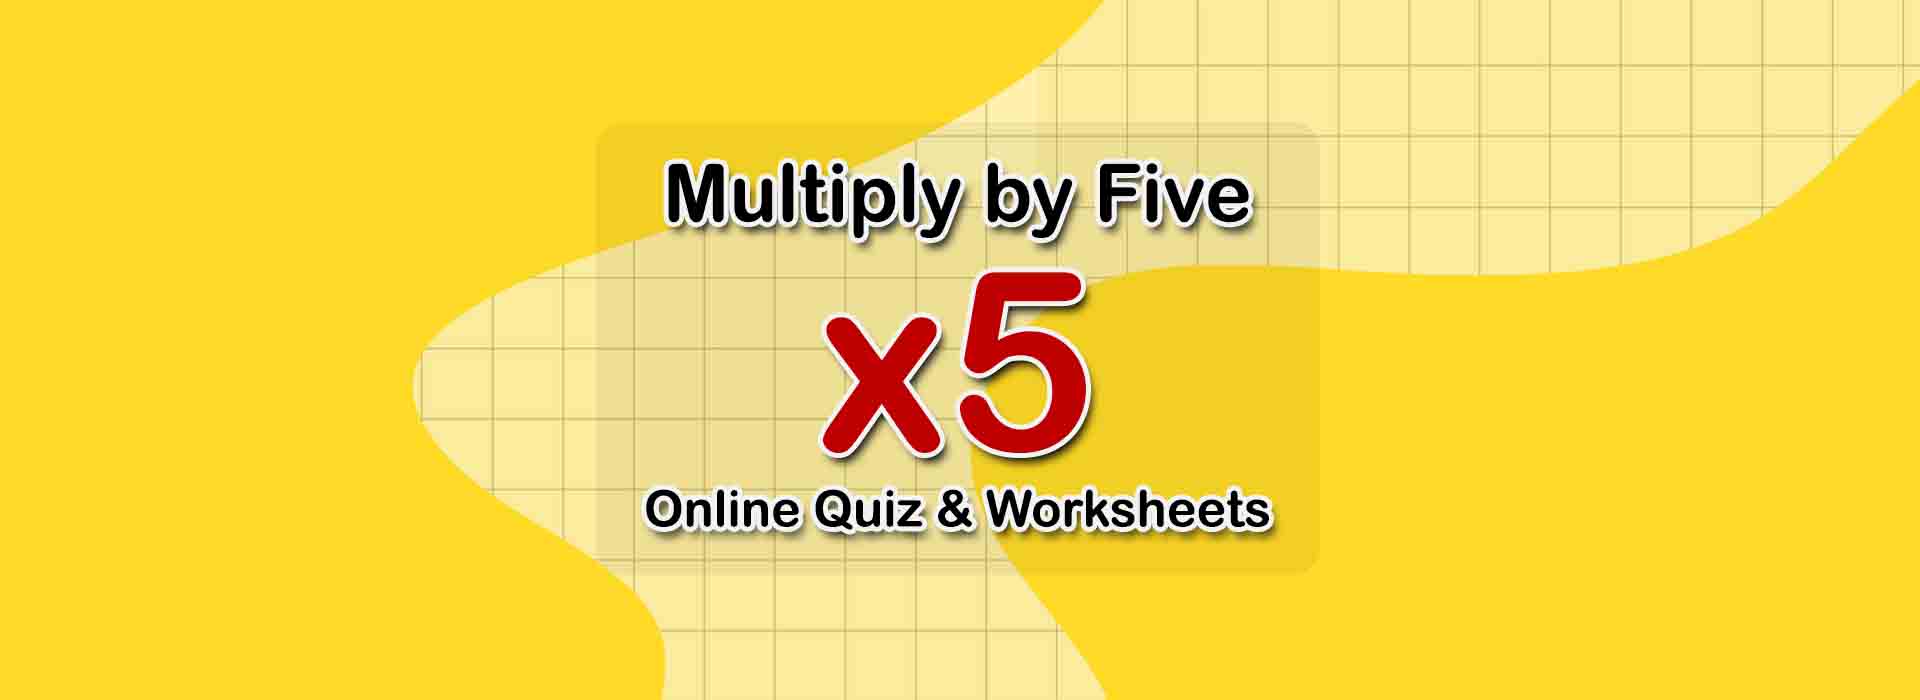 multiply-by-five-multiplication-quiz-and-worksheets-mathematics-lk